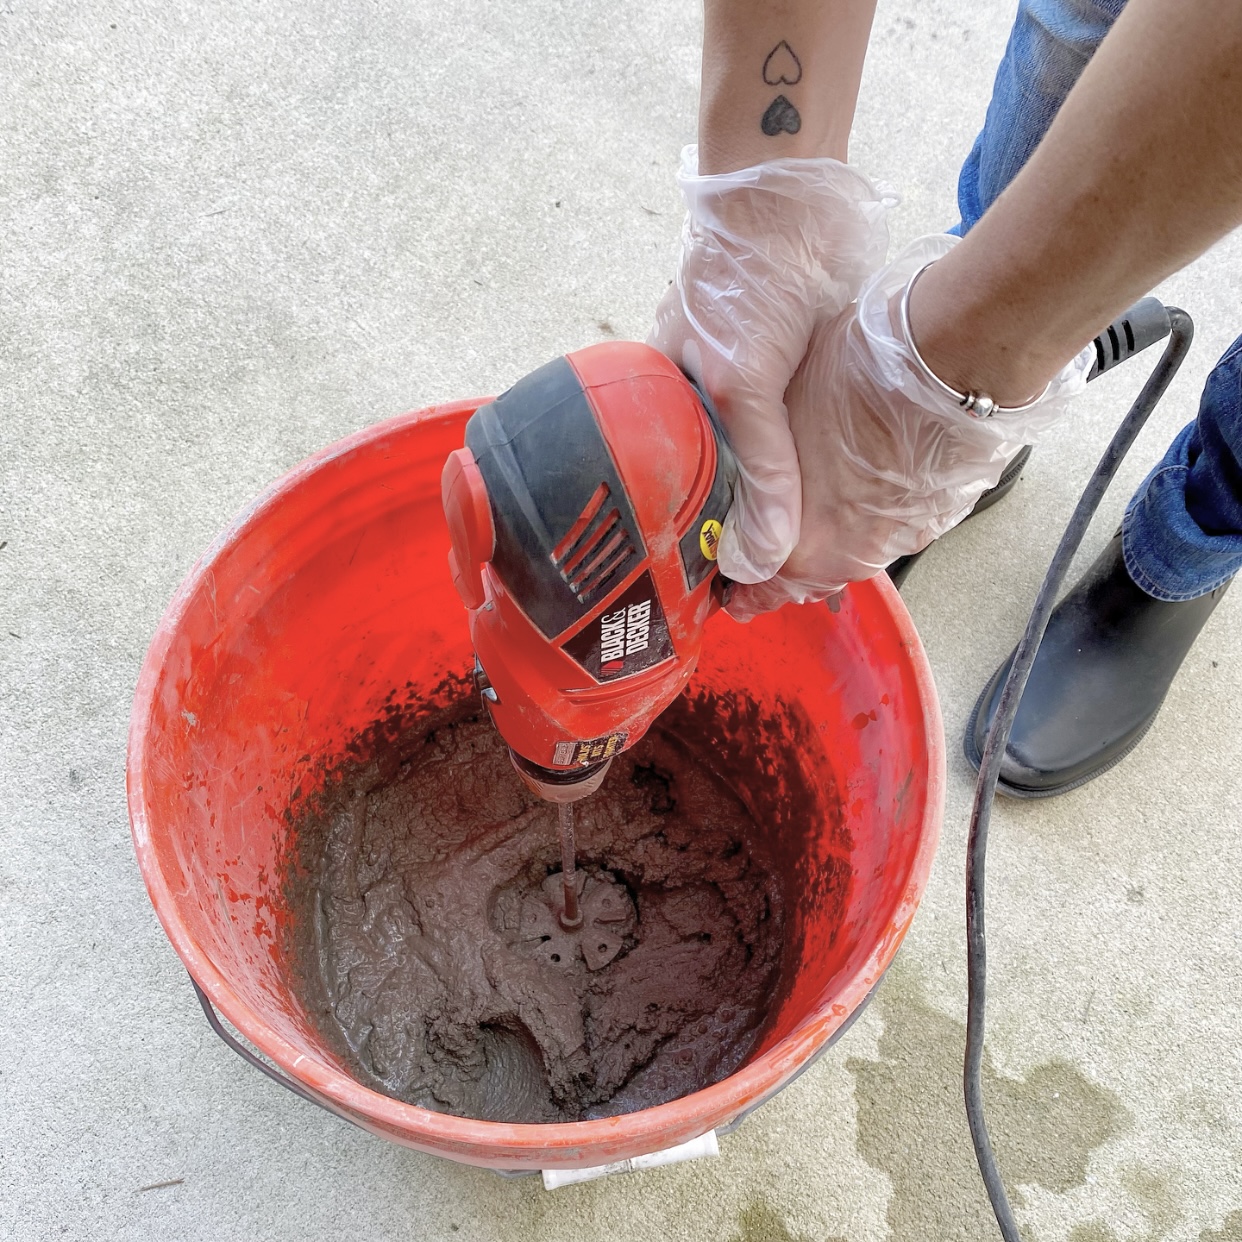 Mixing concrete in a large bucket with a concrete mixer on a drill.